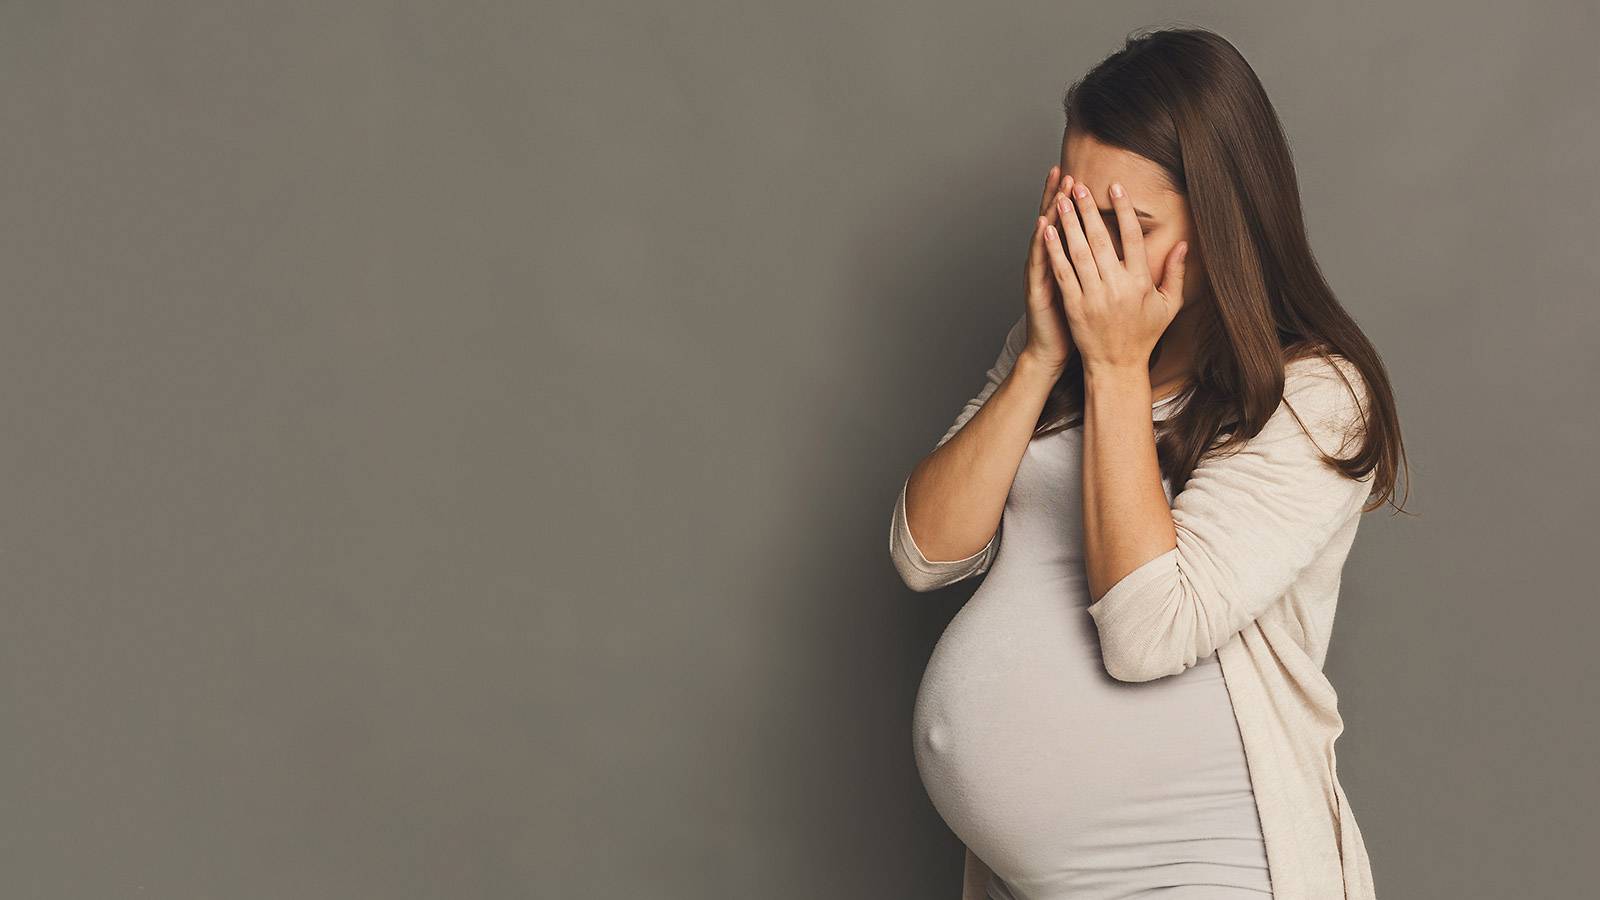 EXPERT ADVICE: What factors will increase your risk of prenatal depression?